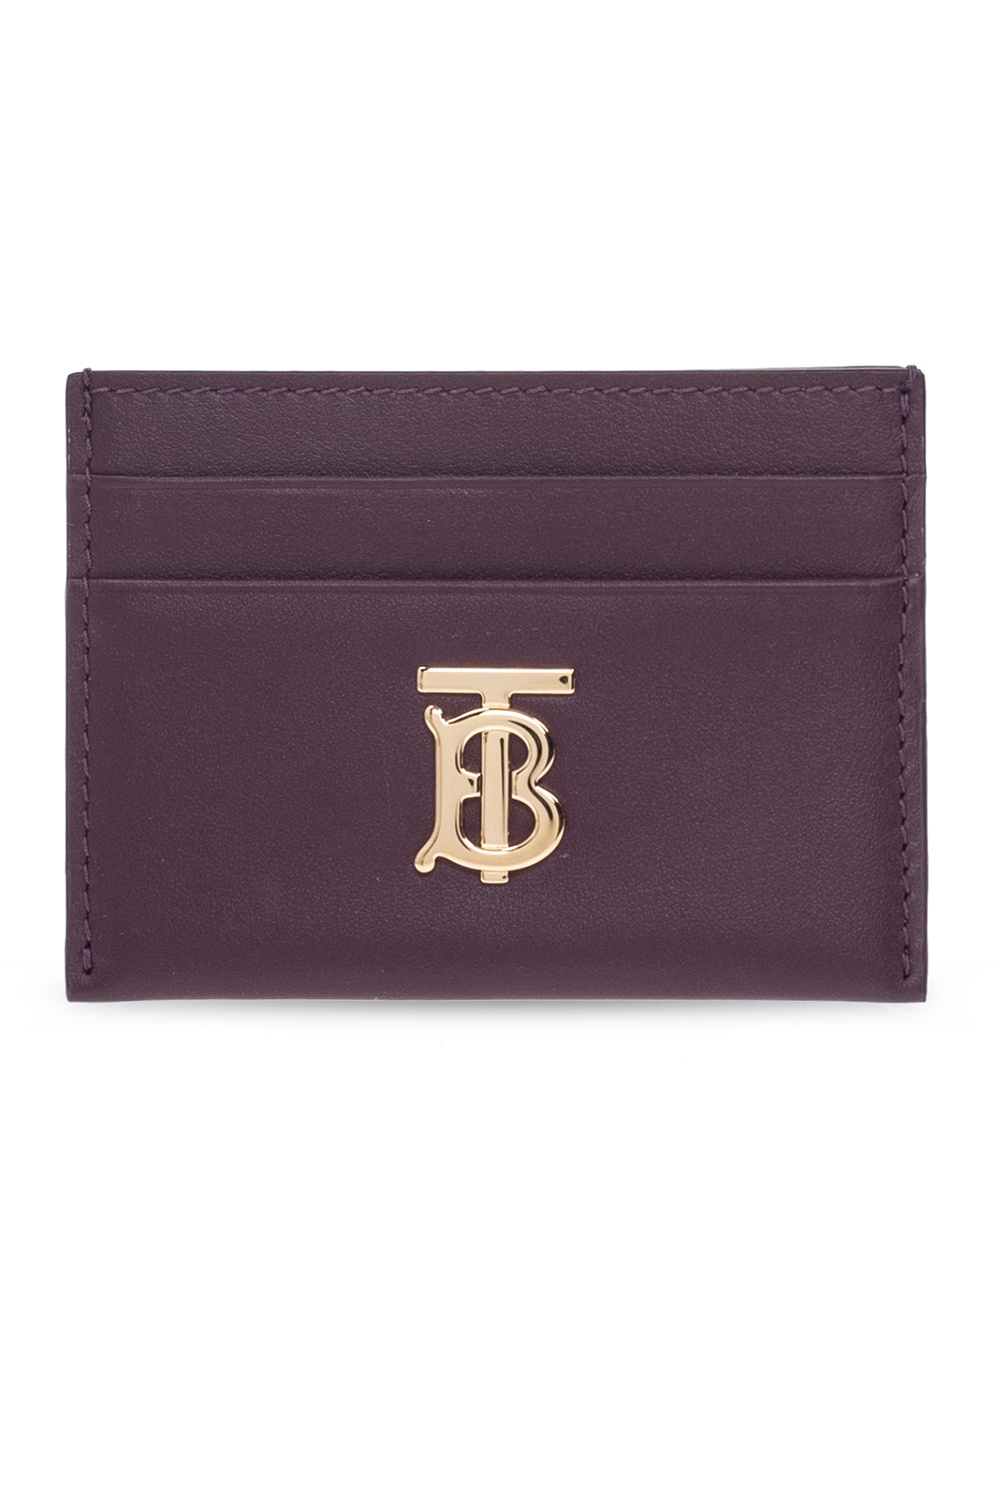 Burberry Card holder with logo, Women's Accessories